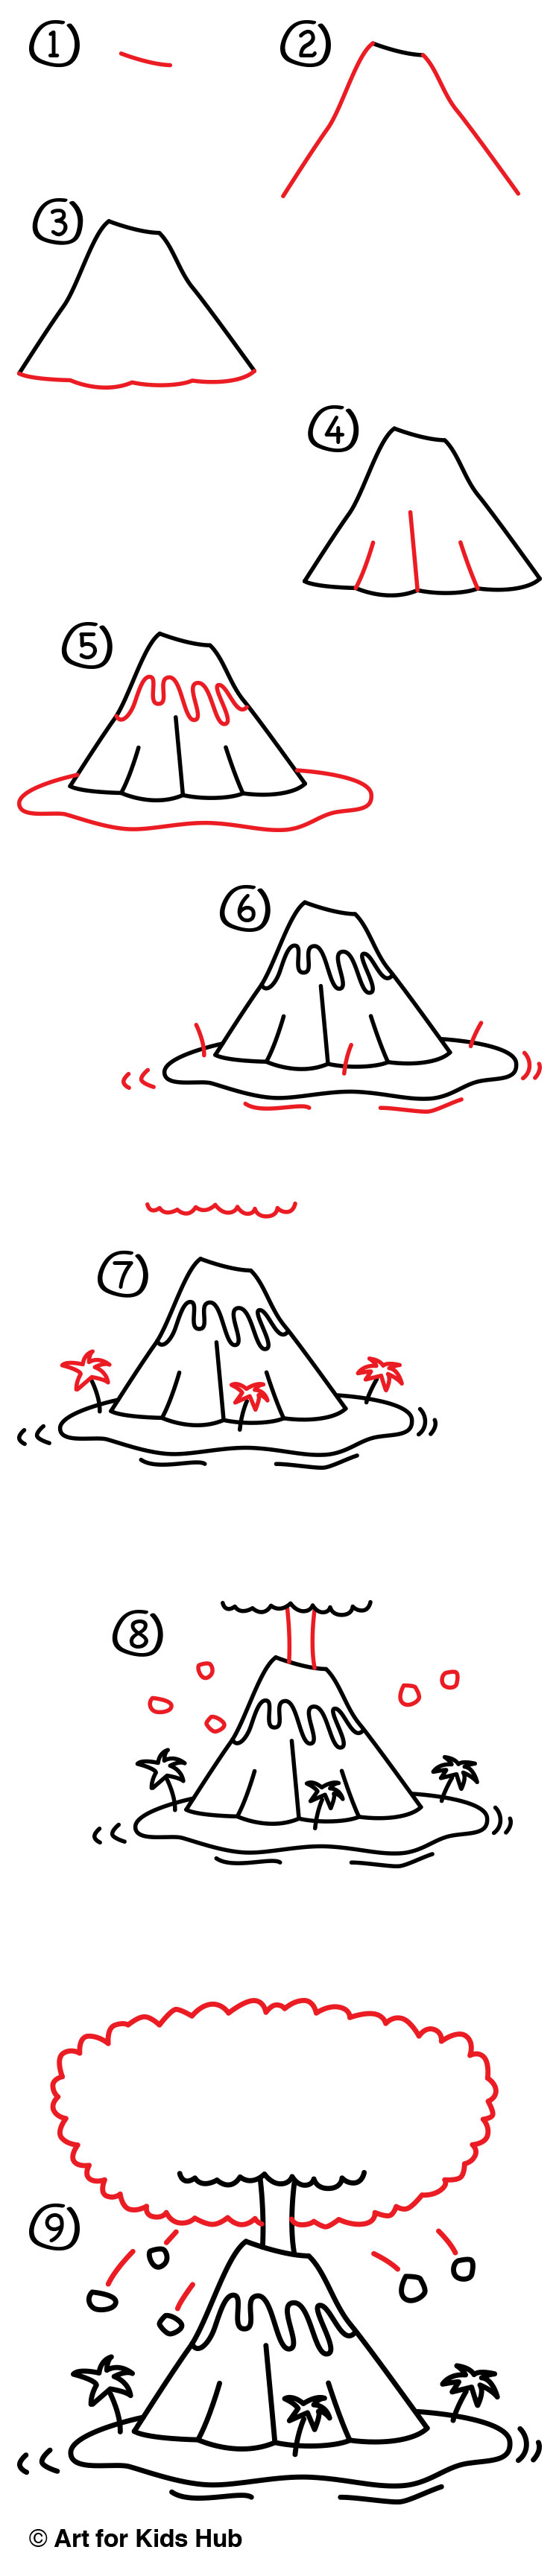 How To Draw A Volcano - Art For Kids Hub